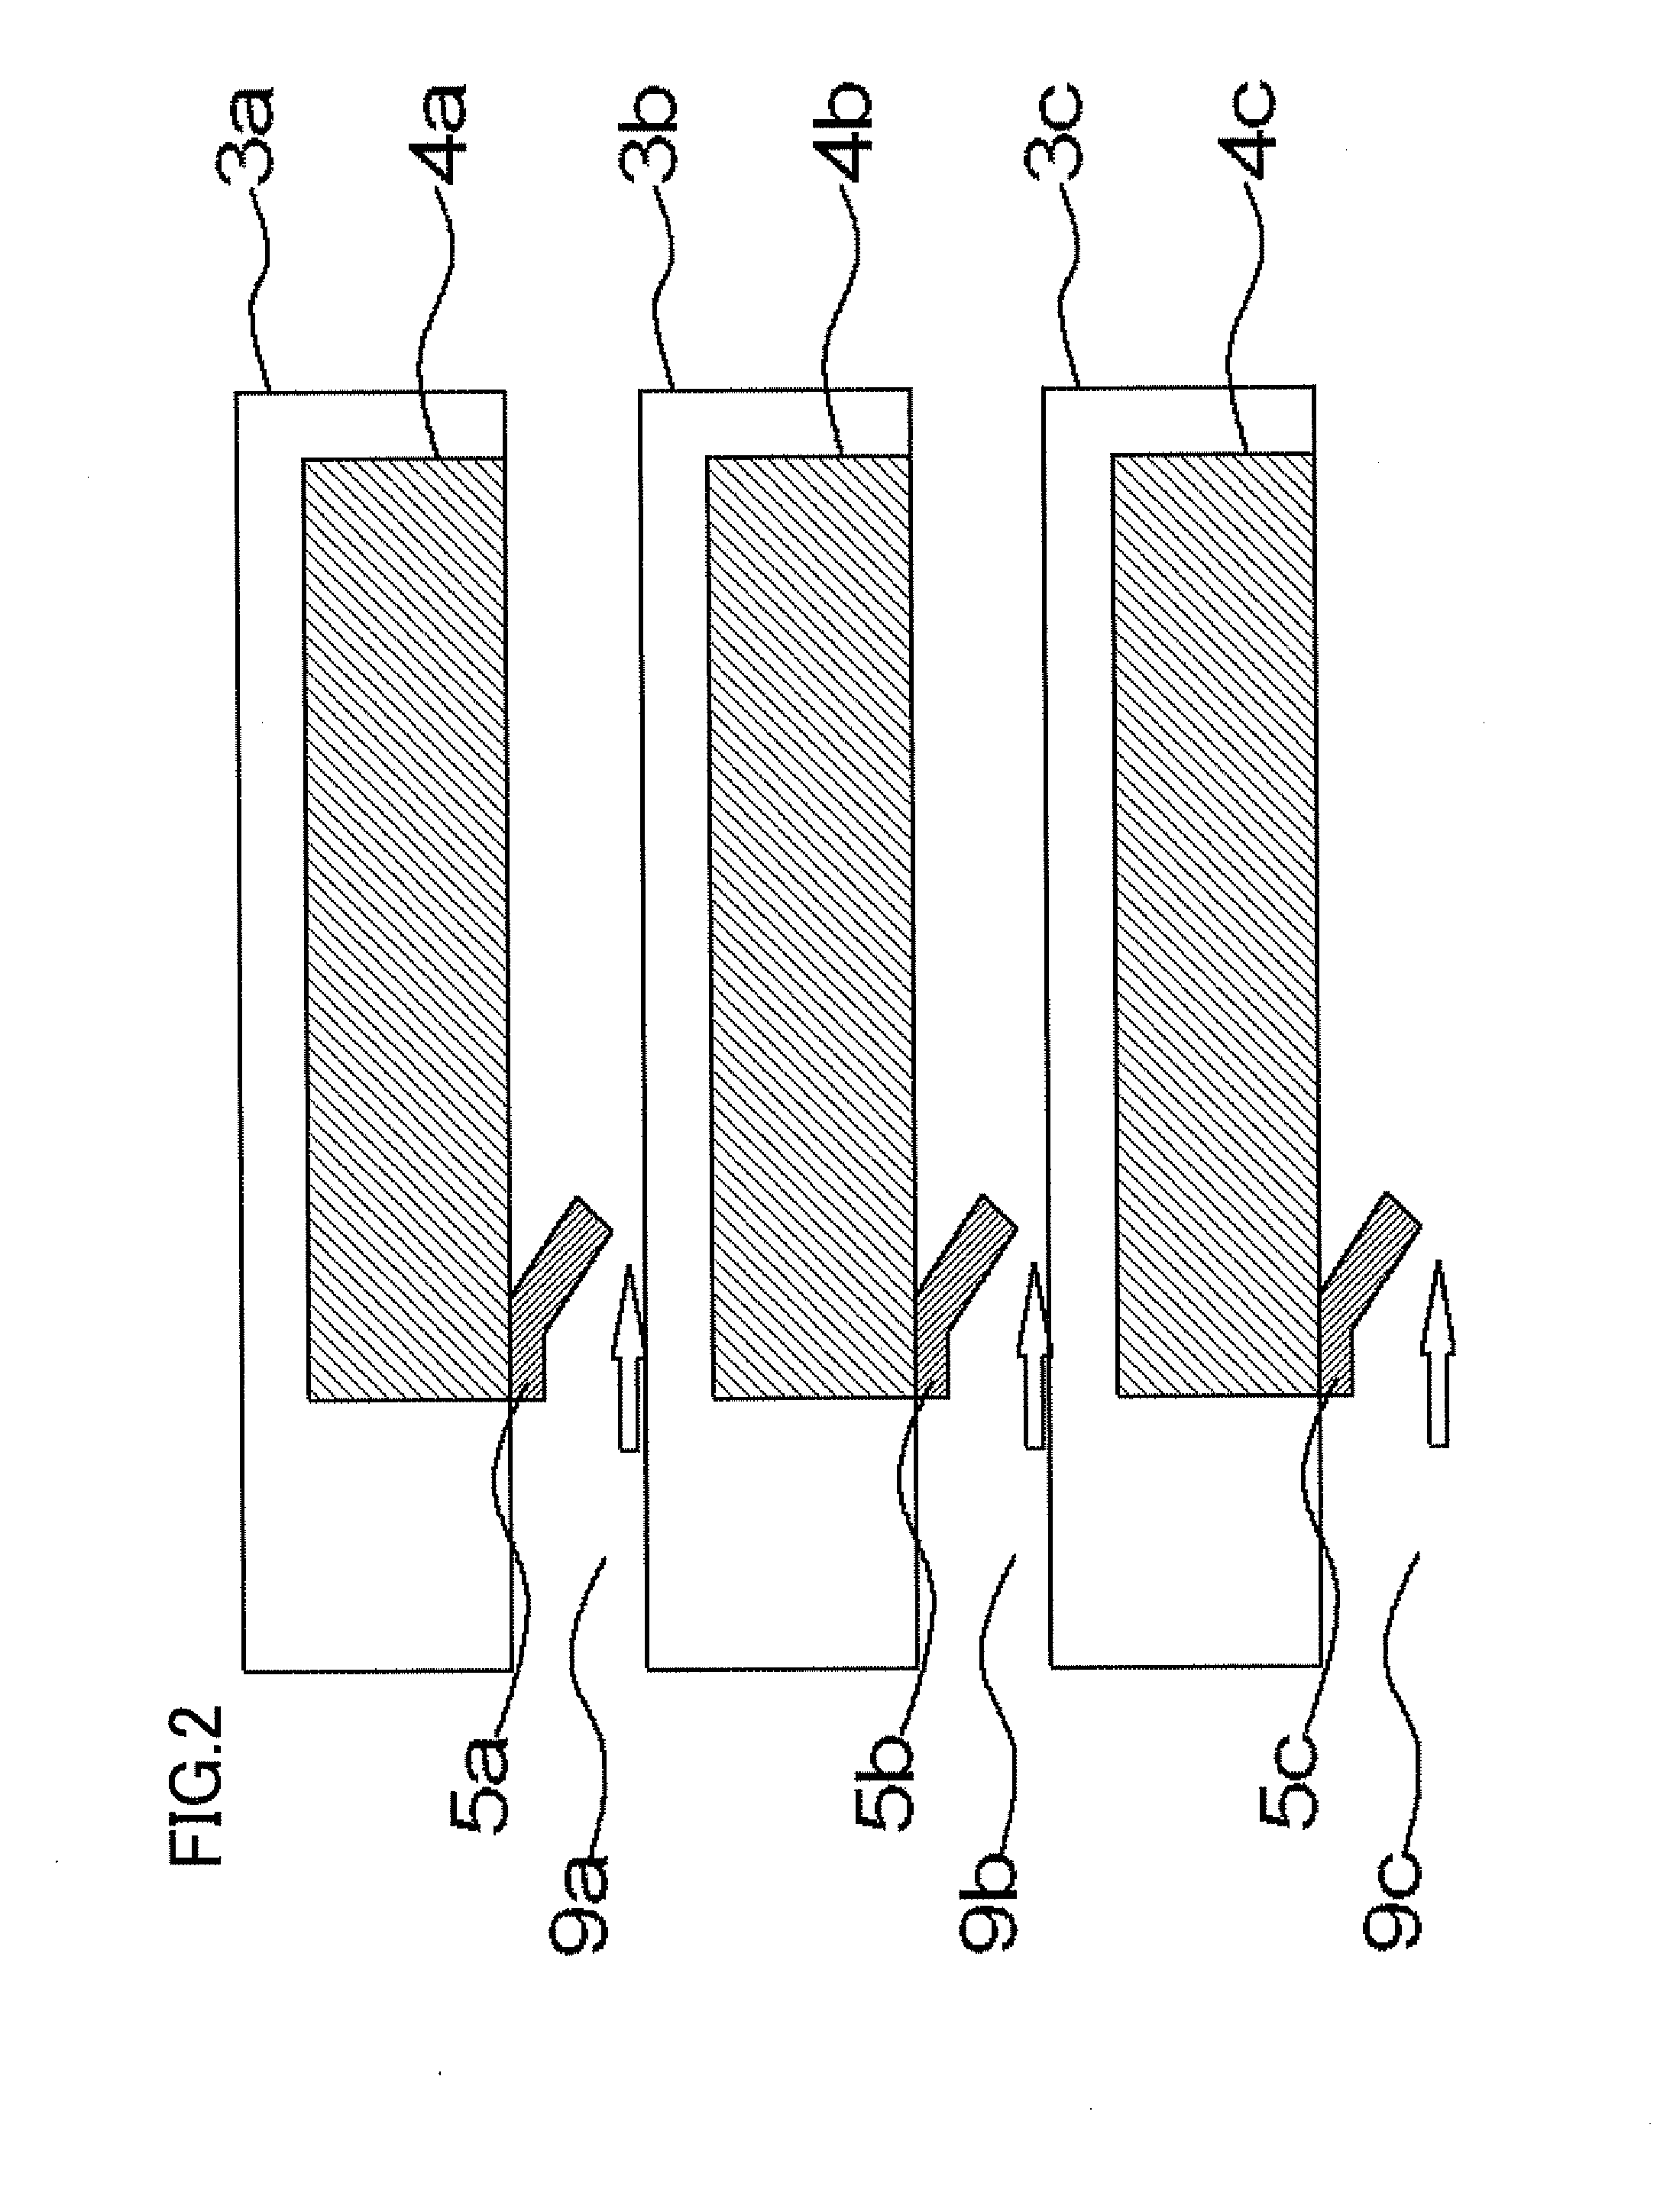 System comprising heat-generator and cooler thereof, and disk array system